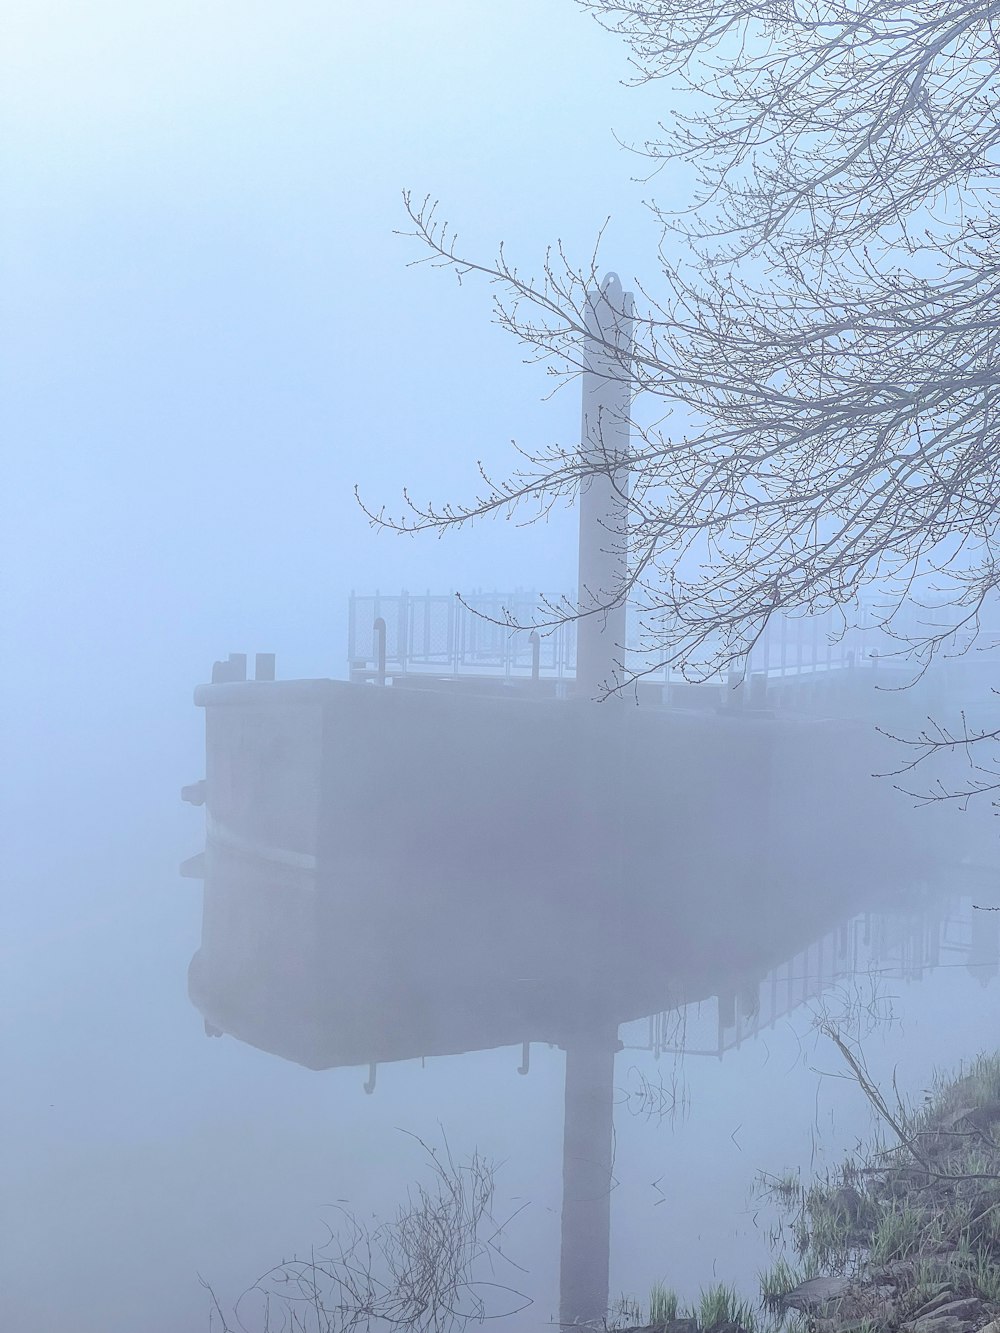 a boat in the water on a foggy day